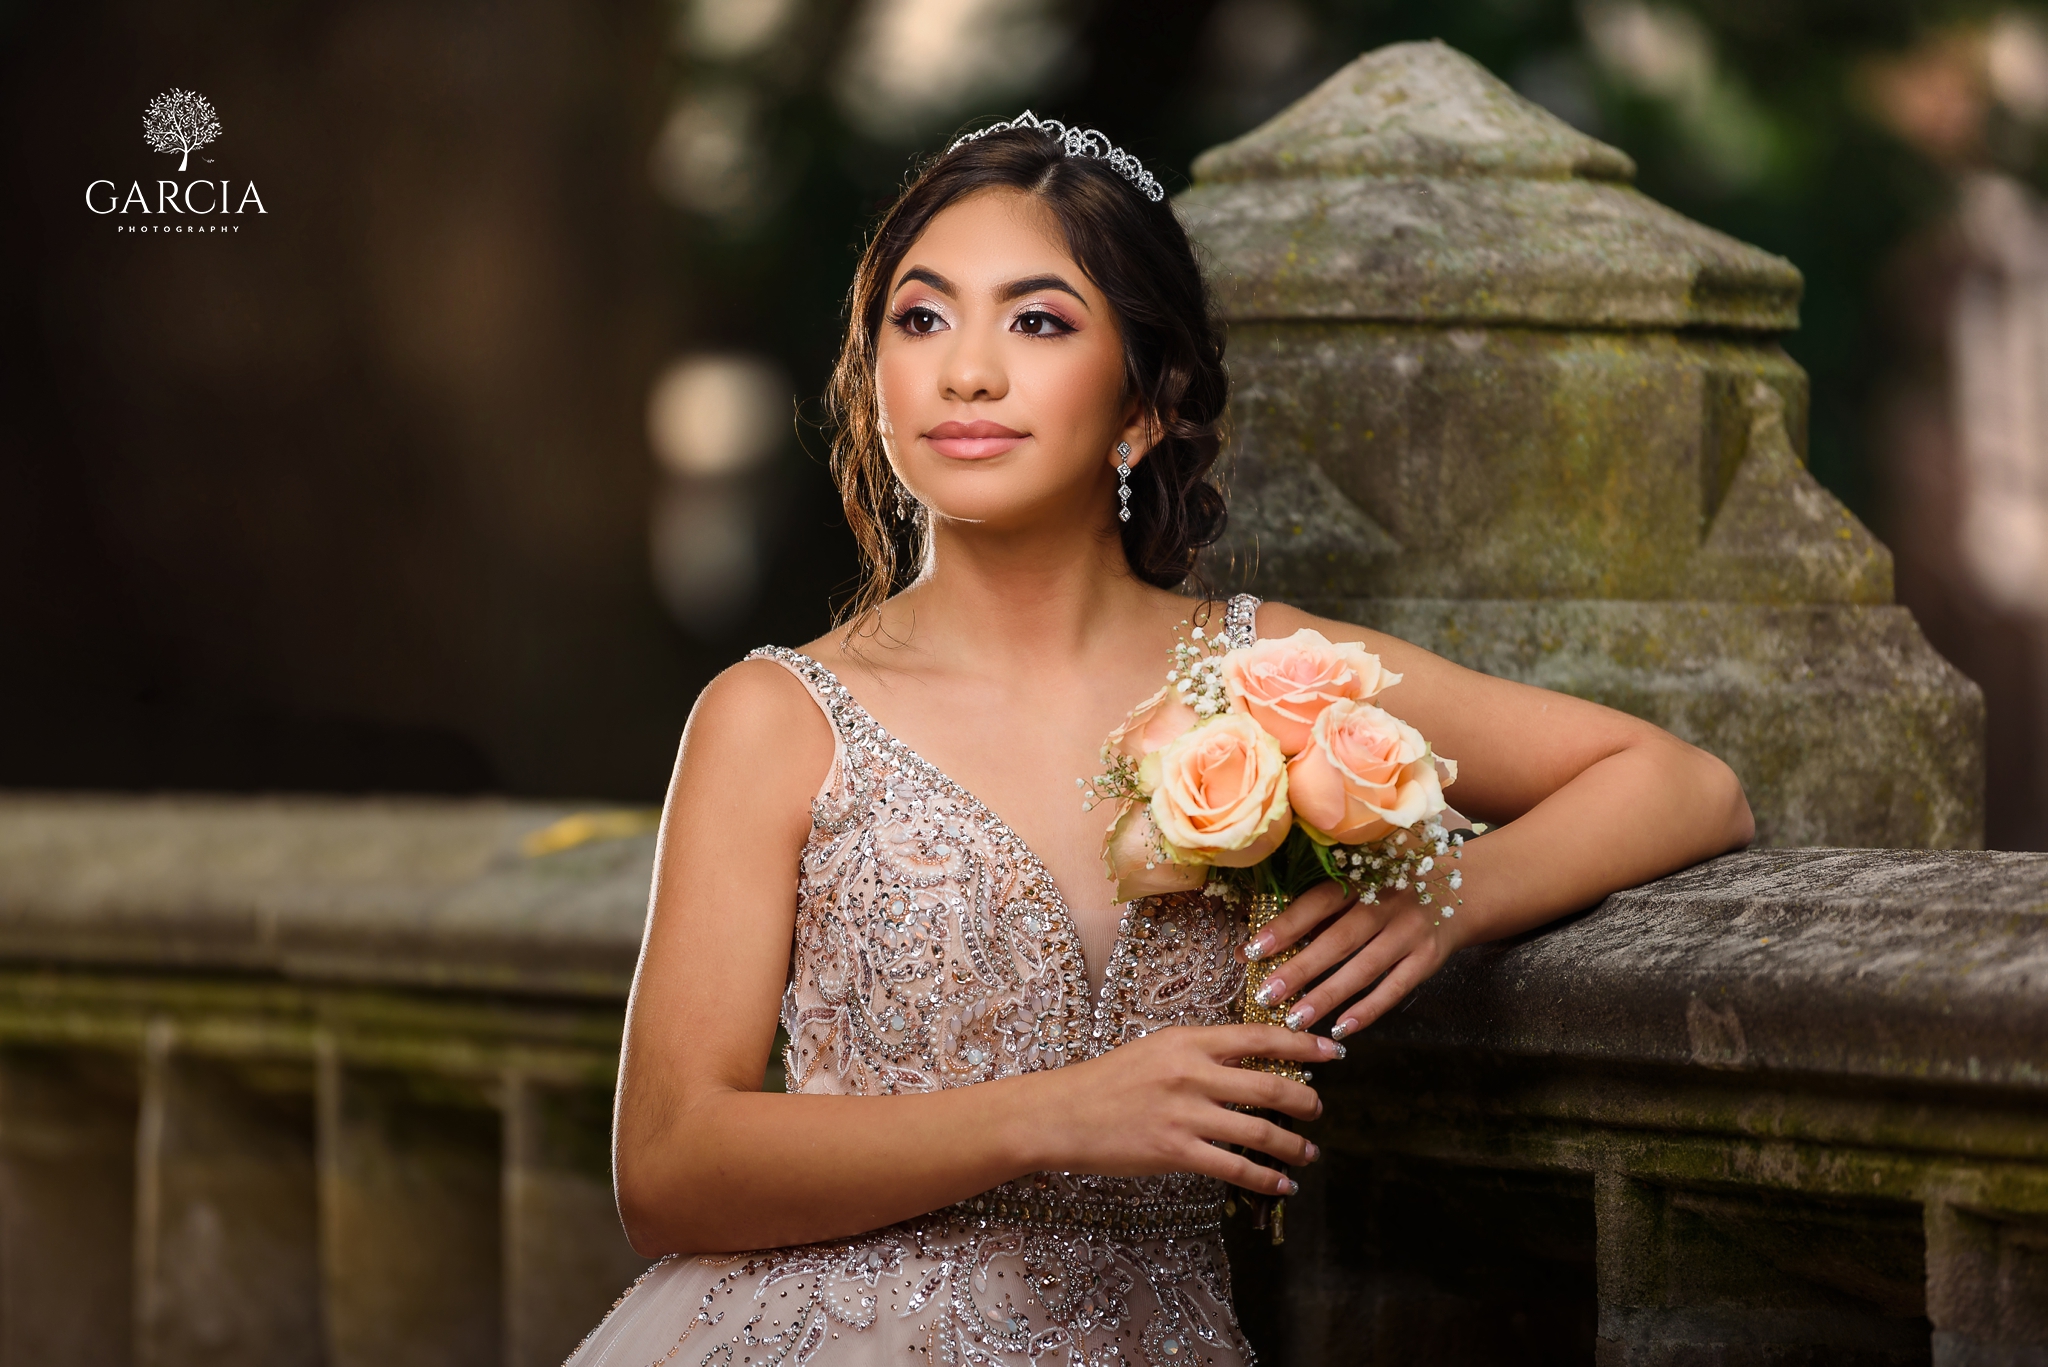 Nicole-Quince-Session-Garcia-Photography-4739.jpg